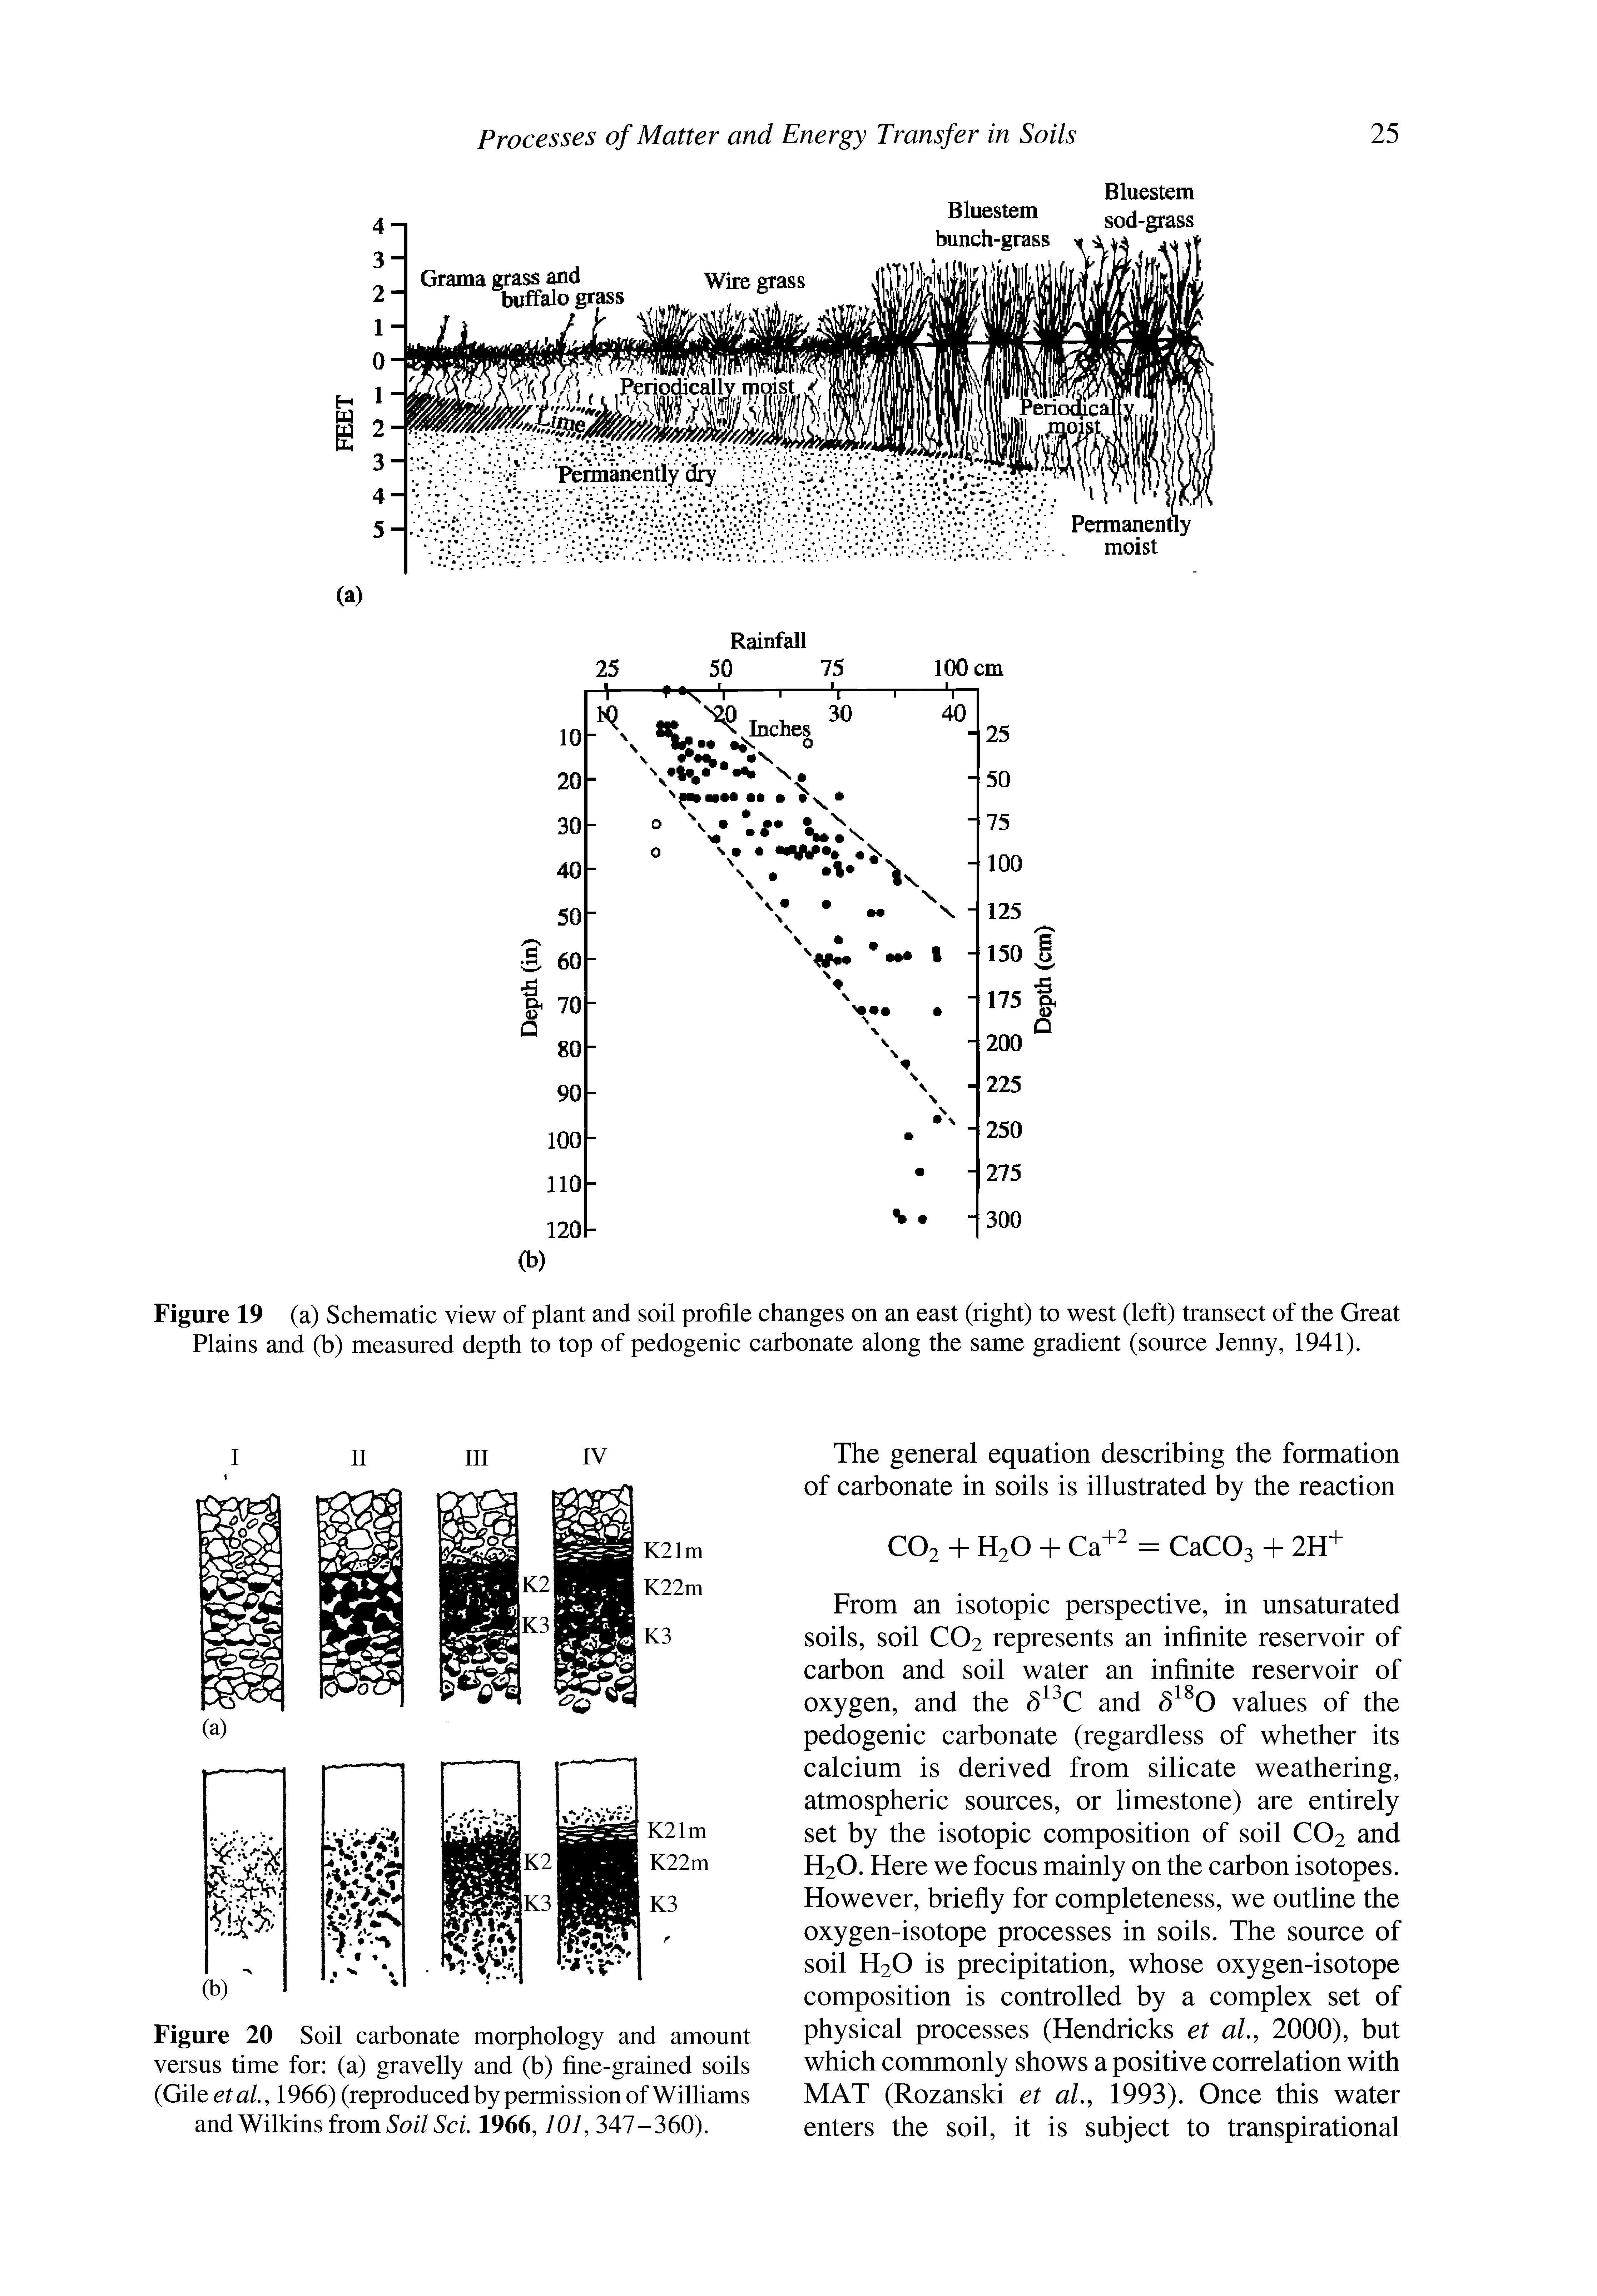 Figure 20 Soil carbonate morphology and amount versus time for (a) gravelly and (b) fine-grained soils etal, 1966) (reprodueed by permission of Williams and Wilkins from 5 //5c/. 1966,101, 347-360).